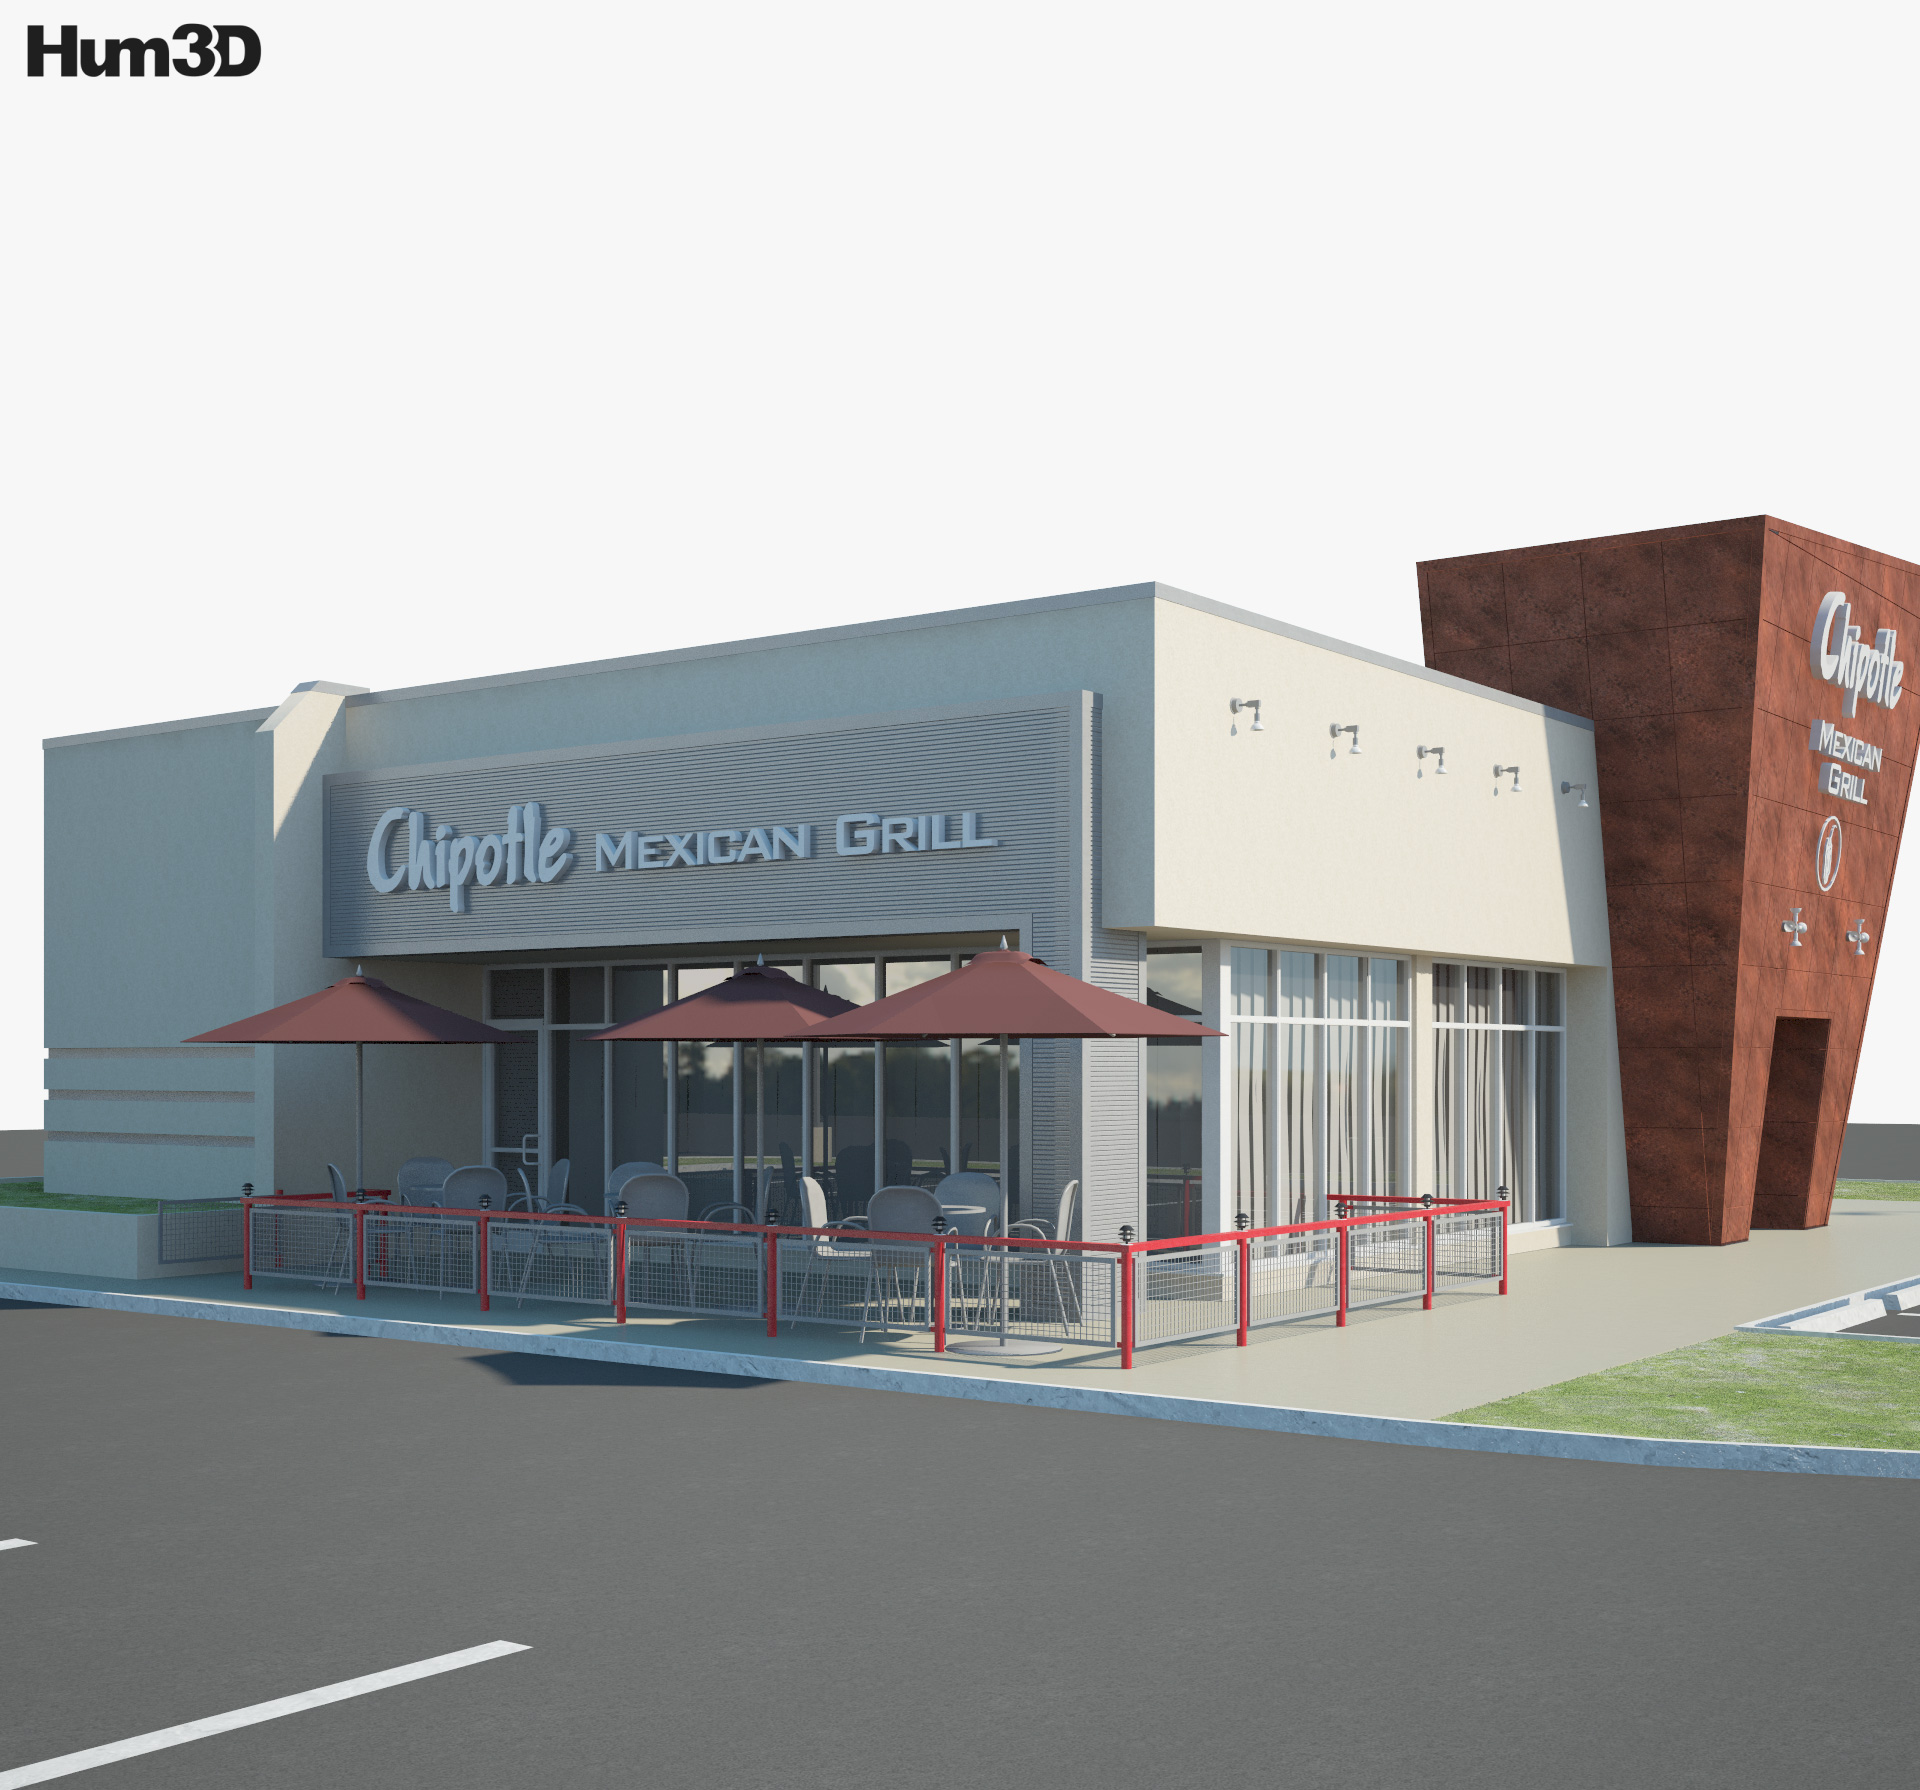 Chipotle Mexican Grill Restaurant 02 3d model